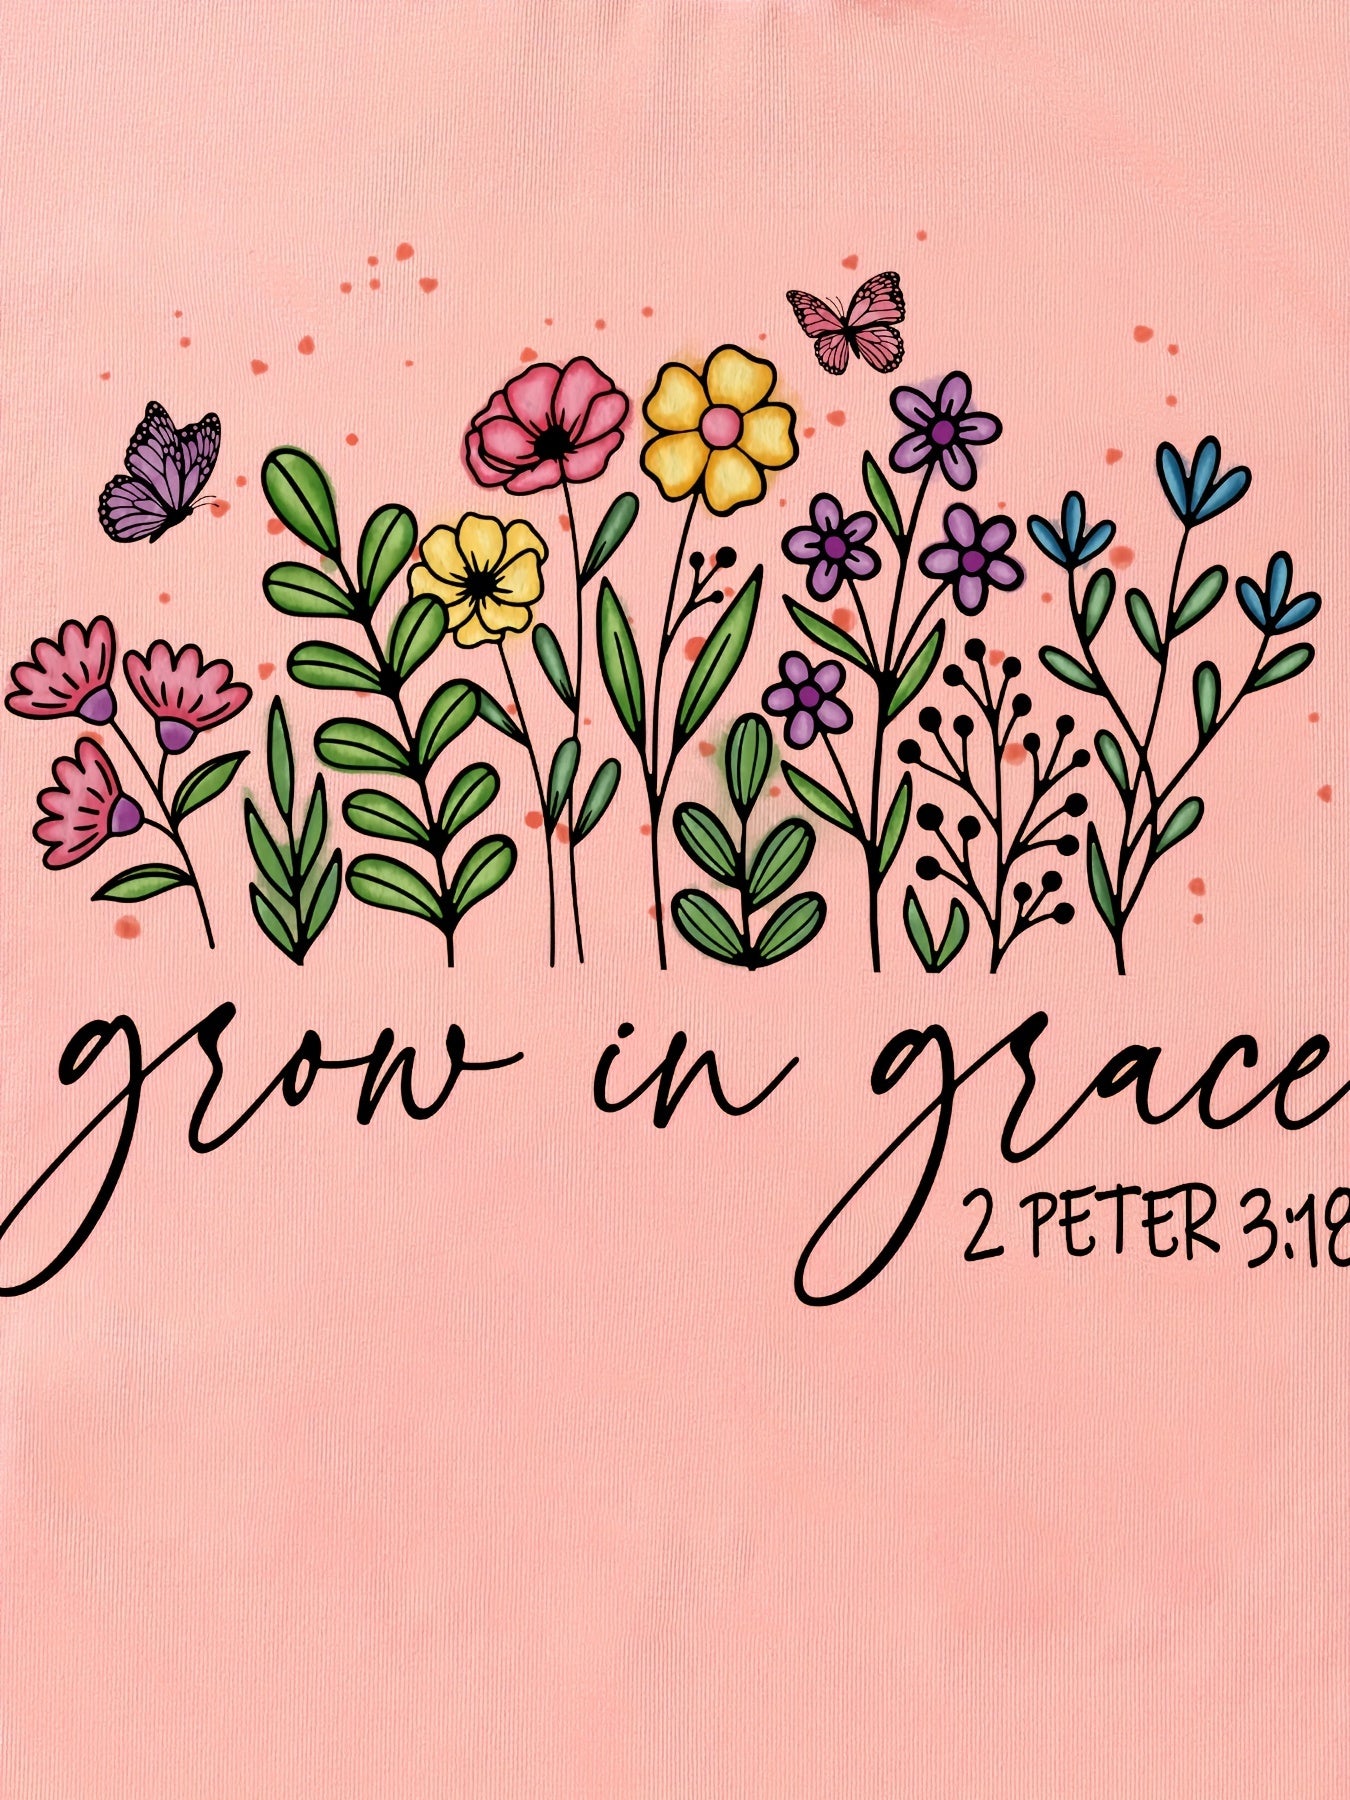 2 Peter 3:18 Grow In Grace Youth Christian T-Shirt claimedbygoddesigns